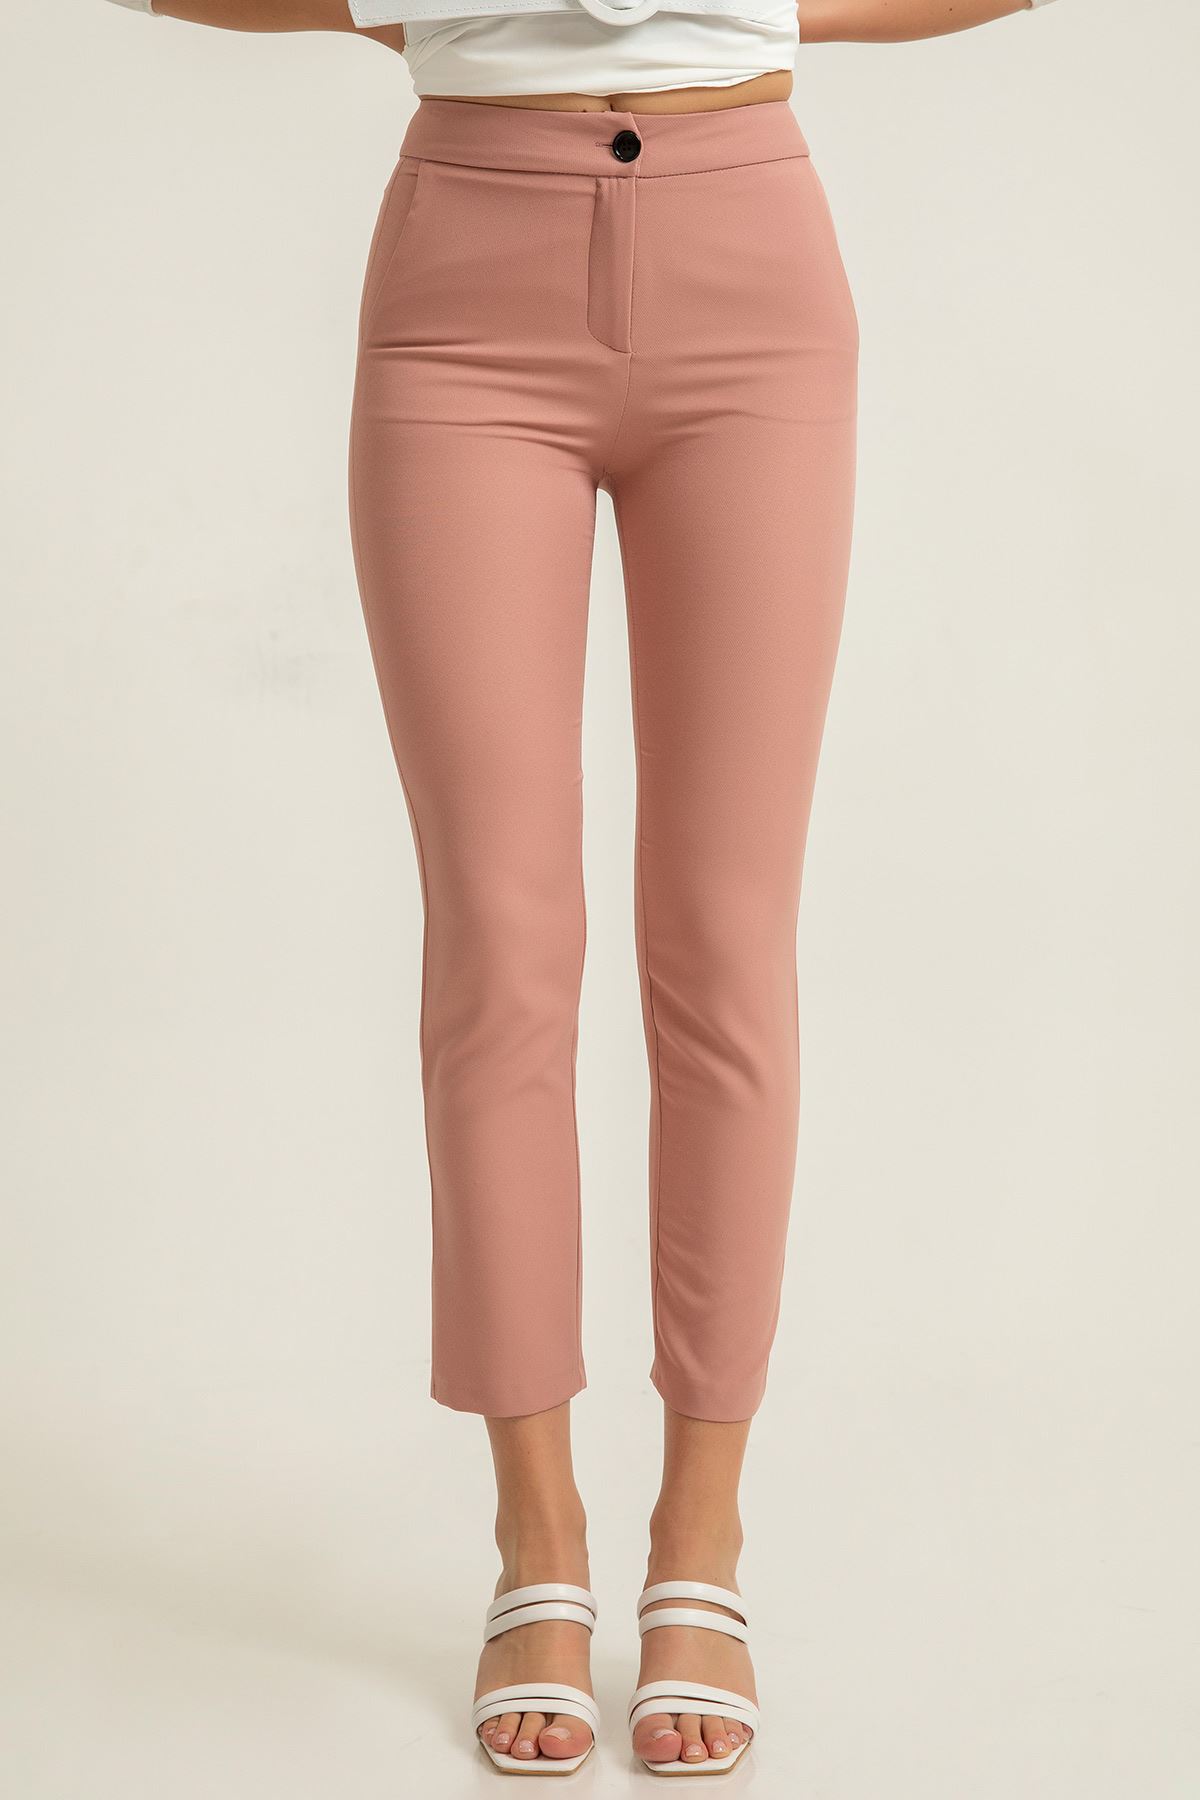 Atlas Fabric Ankle Length Tight Fit Women'S Trouser - Light Pink